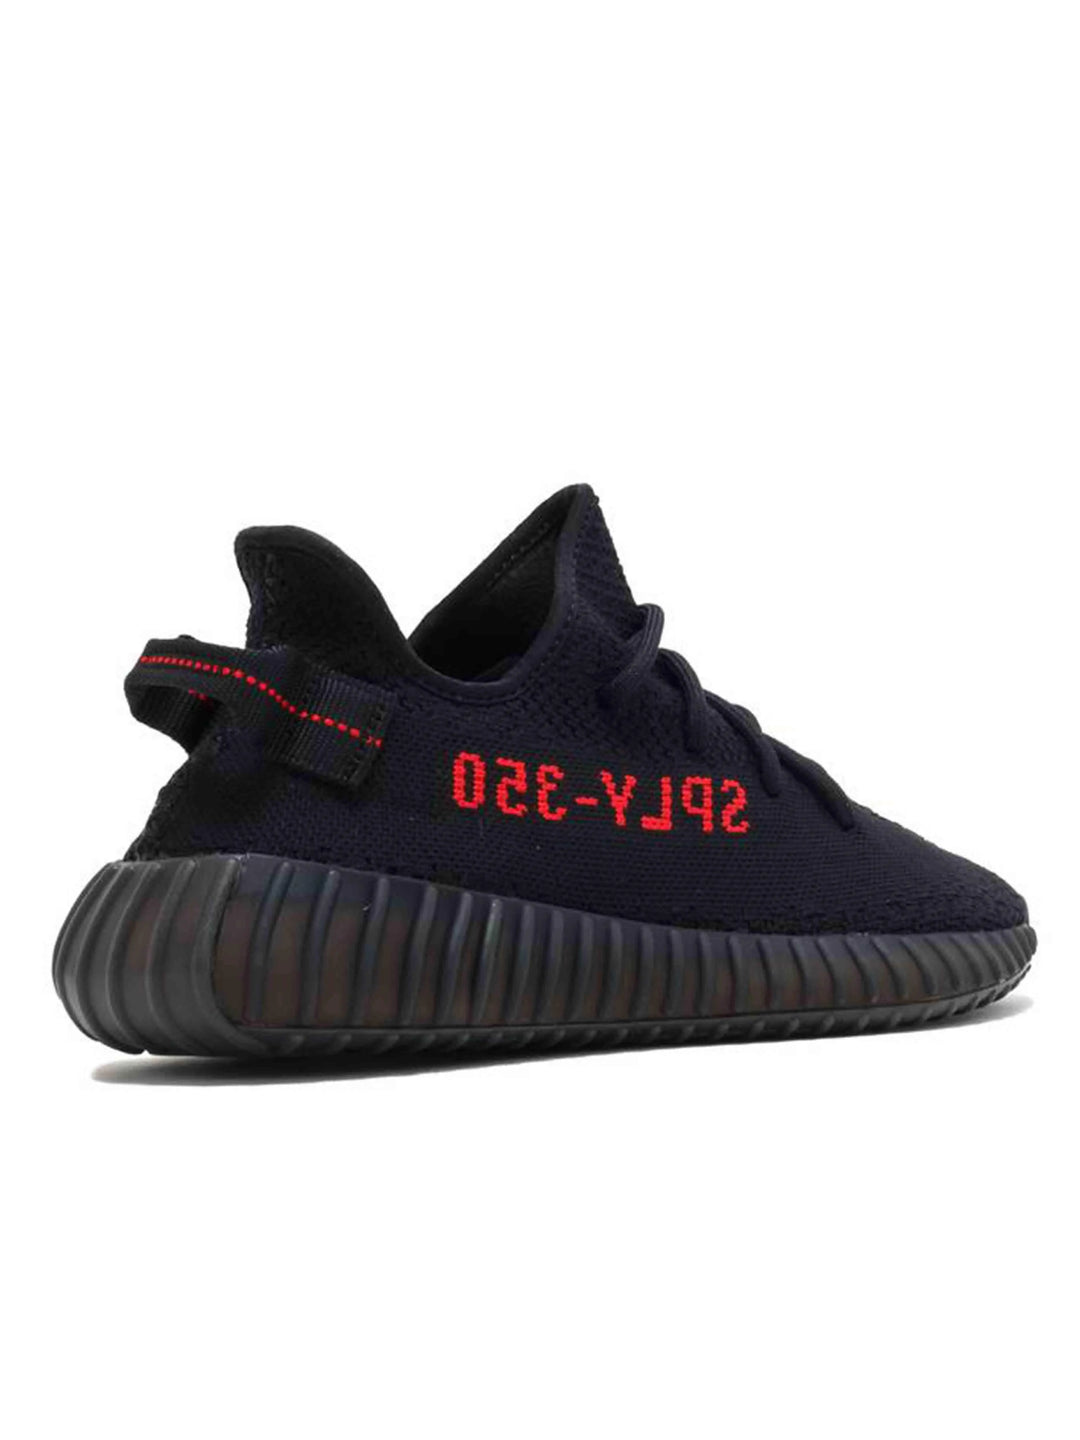 Adidas Yeezy Boost 350 V2 Black Red 'Bred' [USED] Prior